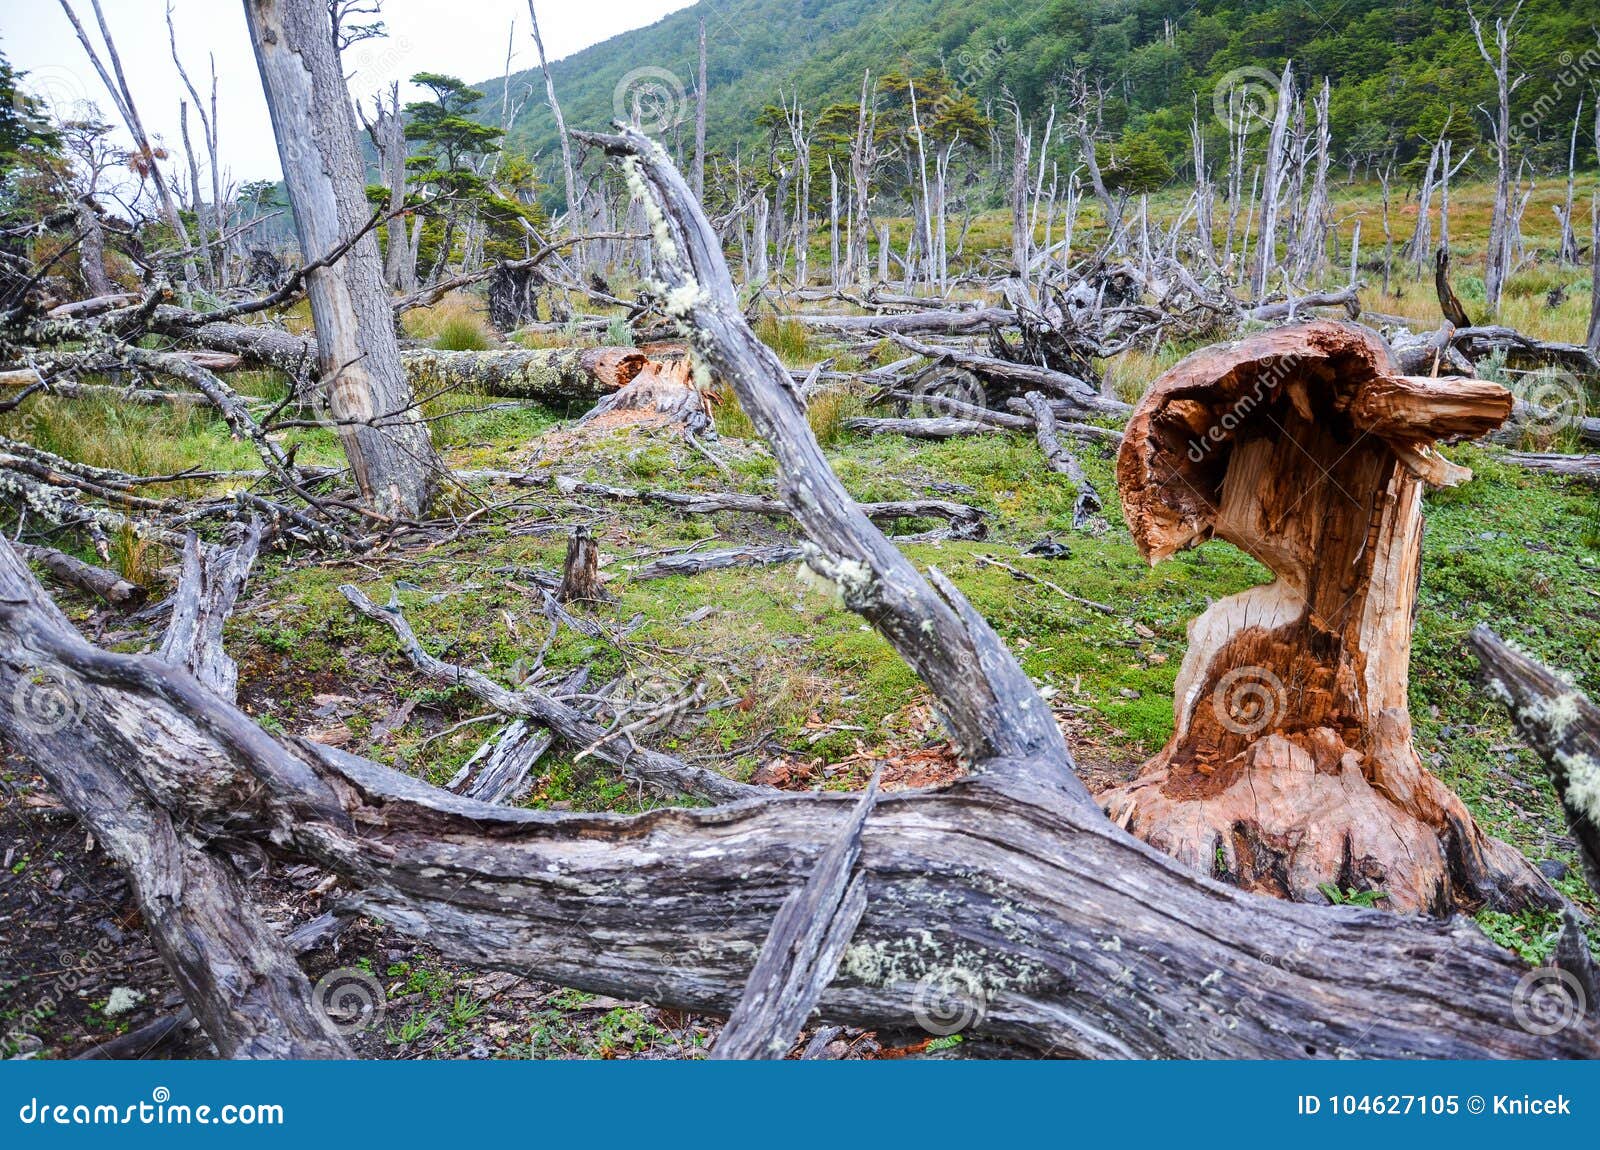 fallen trees and the damage made by beavers in dientes de navarino, isla navarino, chile